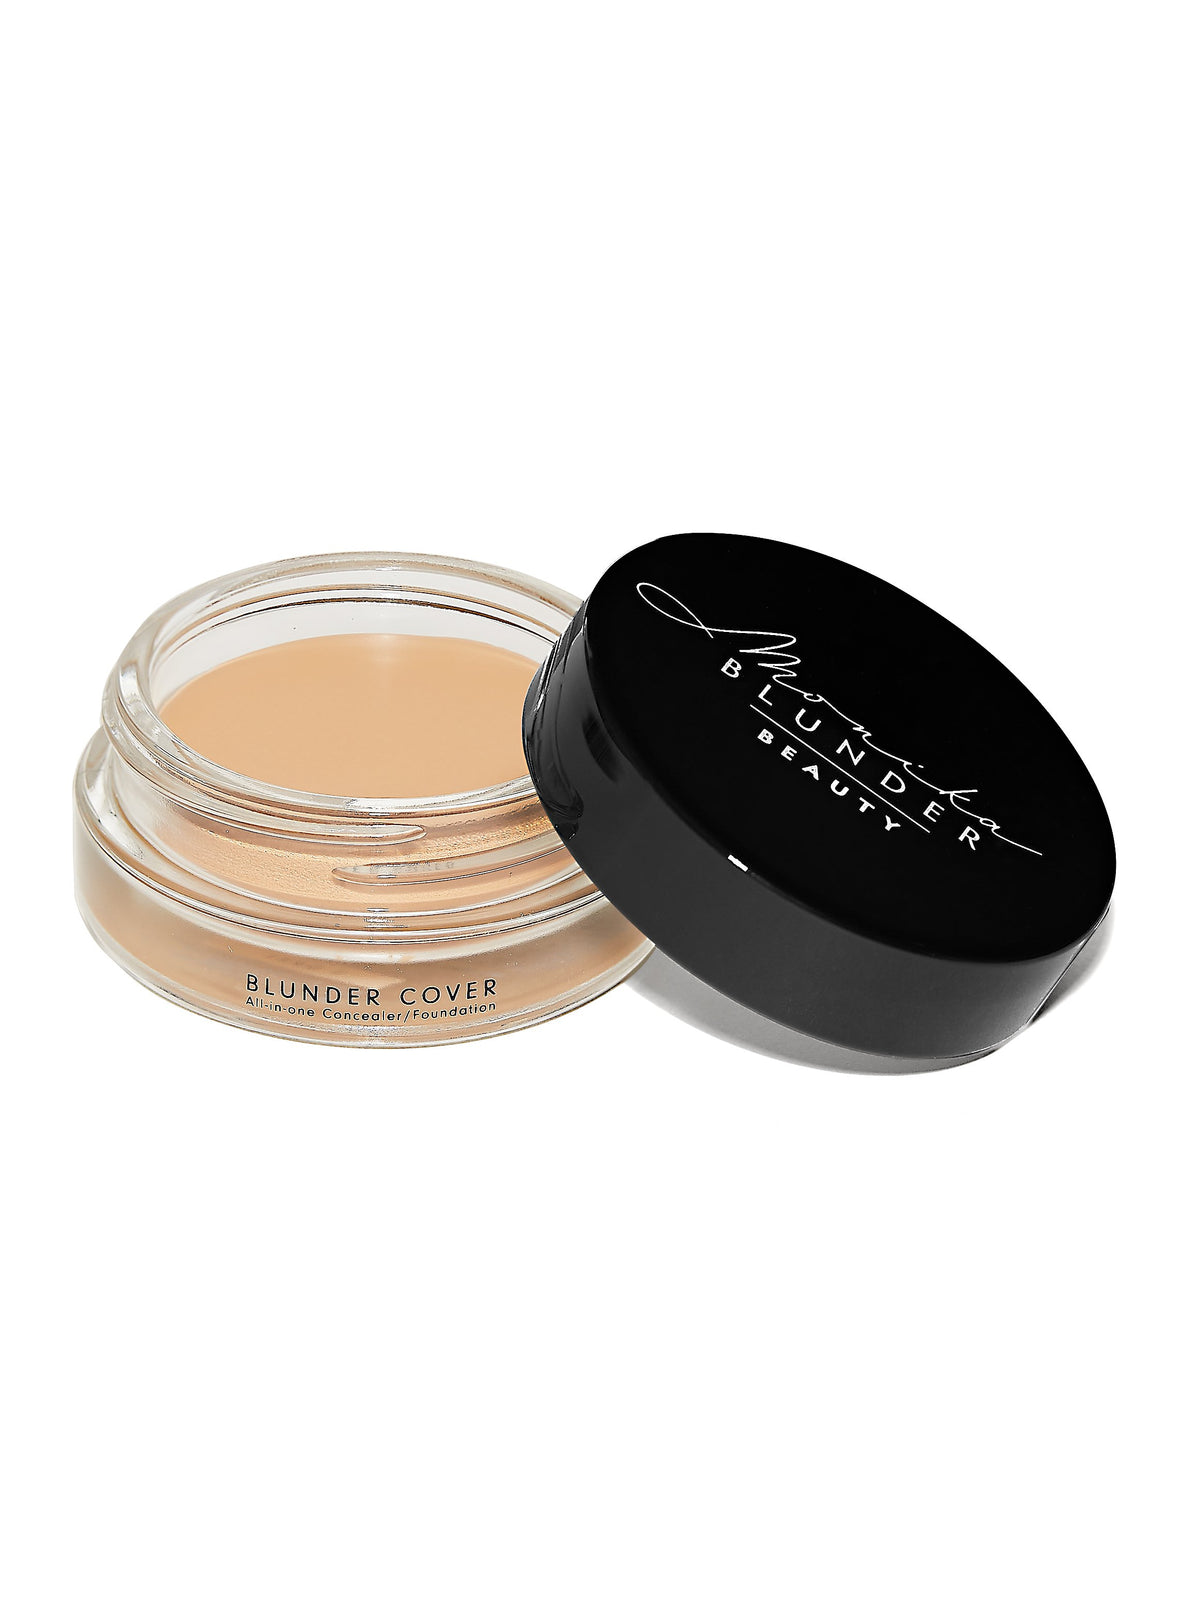 3 DREI Blunder Cover All-in-One Concealer/ Foundation